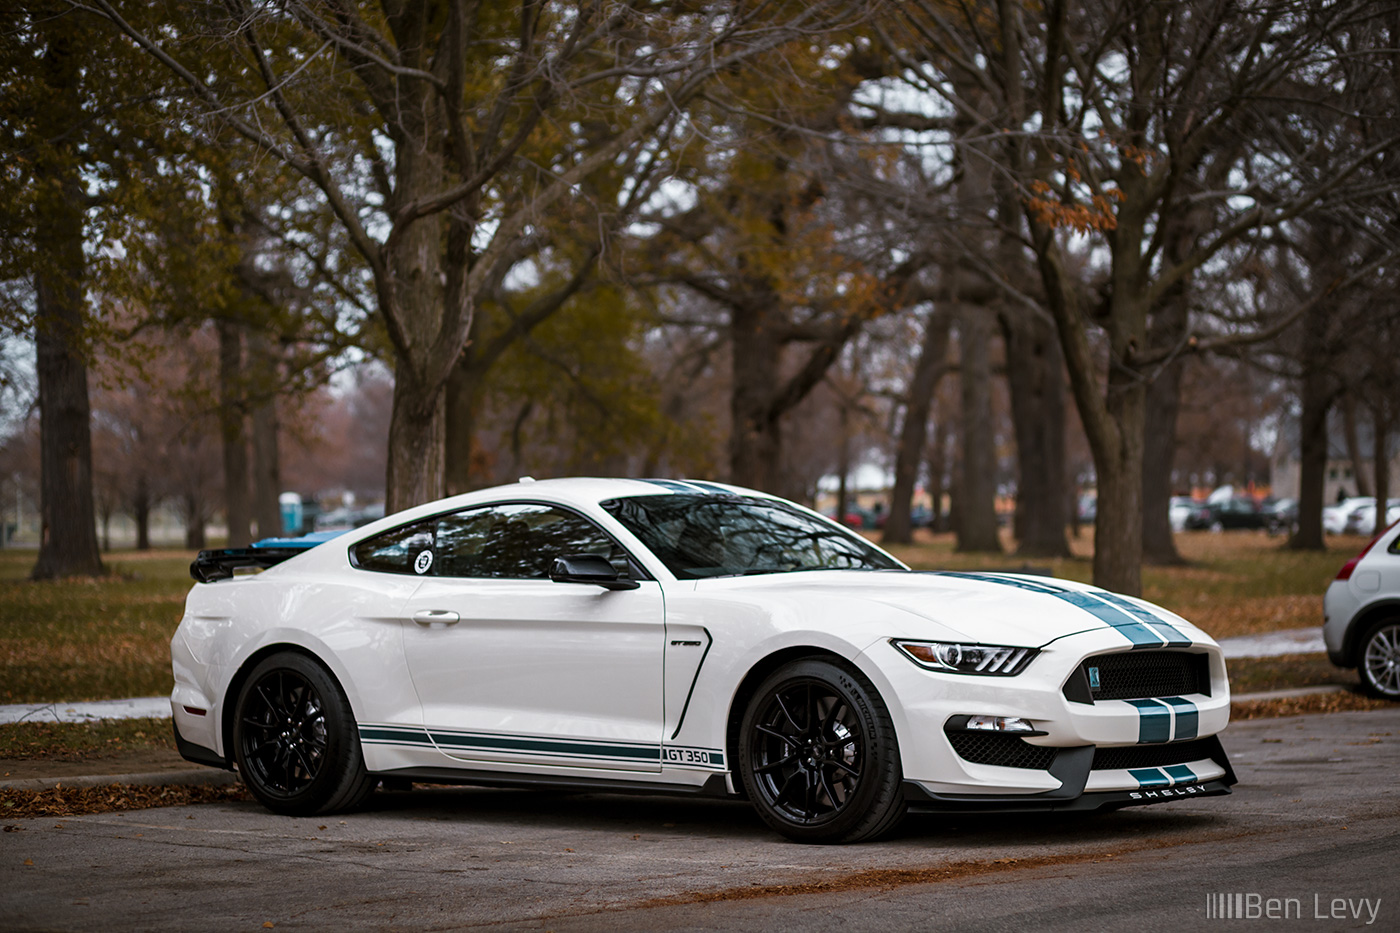 White S550 Shelby Mustang GT350 with Blue Stripes